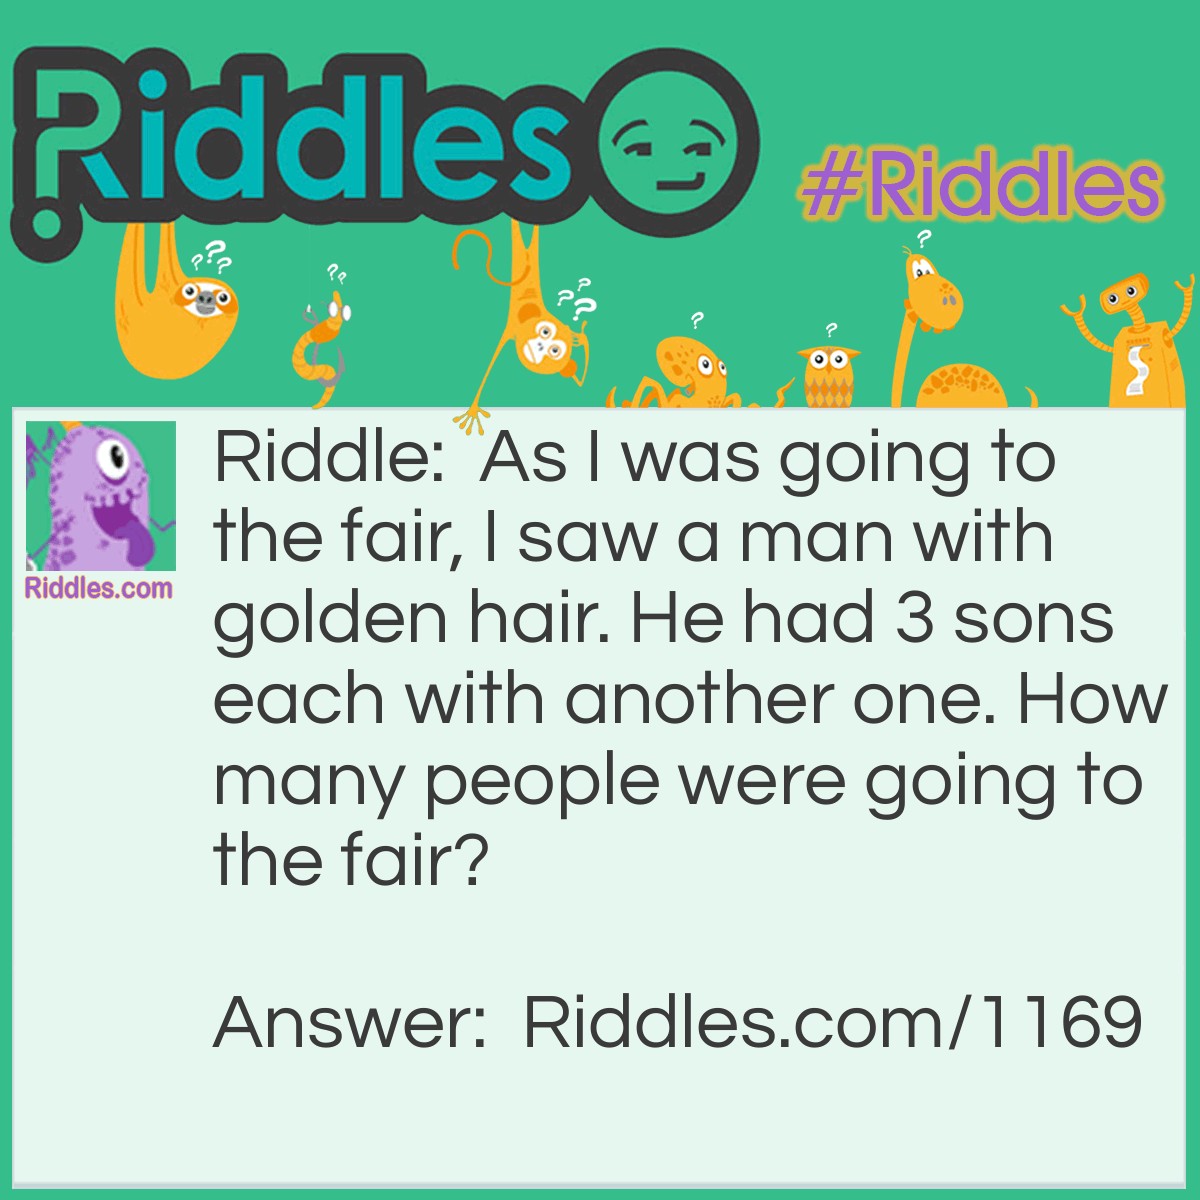 Riddle: As I was going to the fair, I saw a man with golden hair. He had 3 sons each with another one. How many people were going to the fair? Answer: One. Just me because I met the others on the way to the fair.